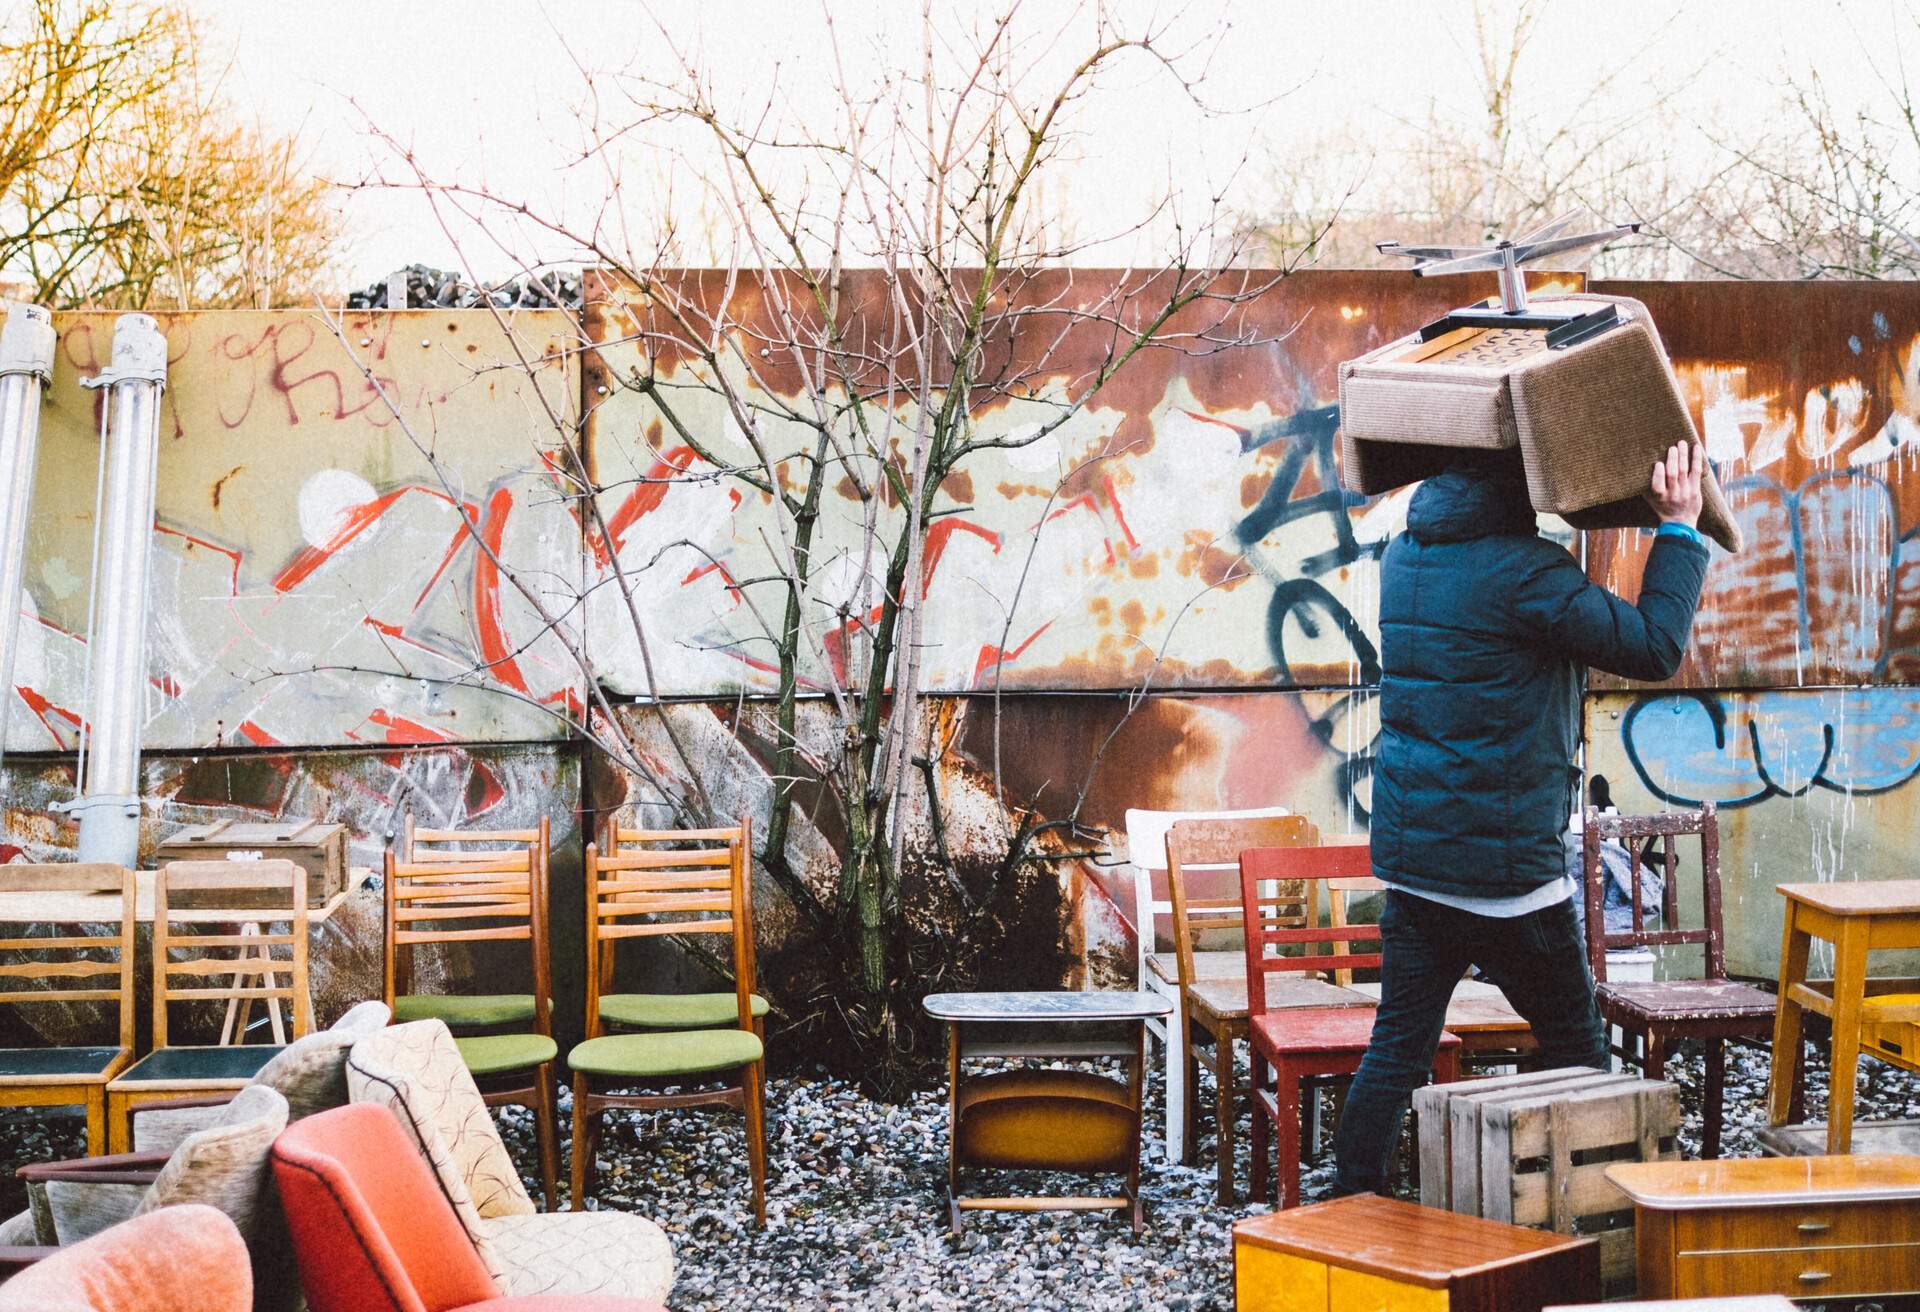 A man at an outdoor furniture store carrying a chair over his head.